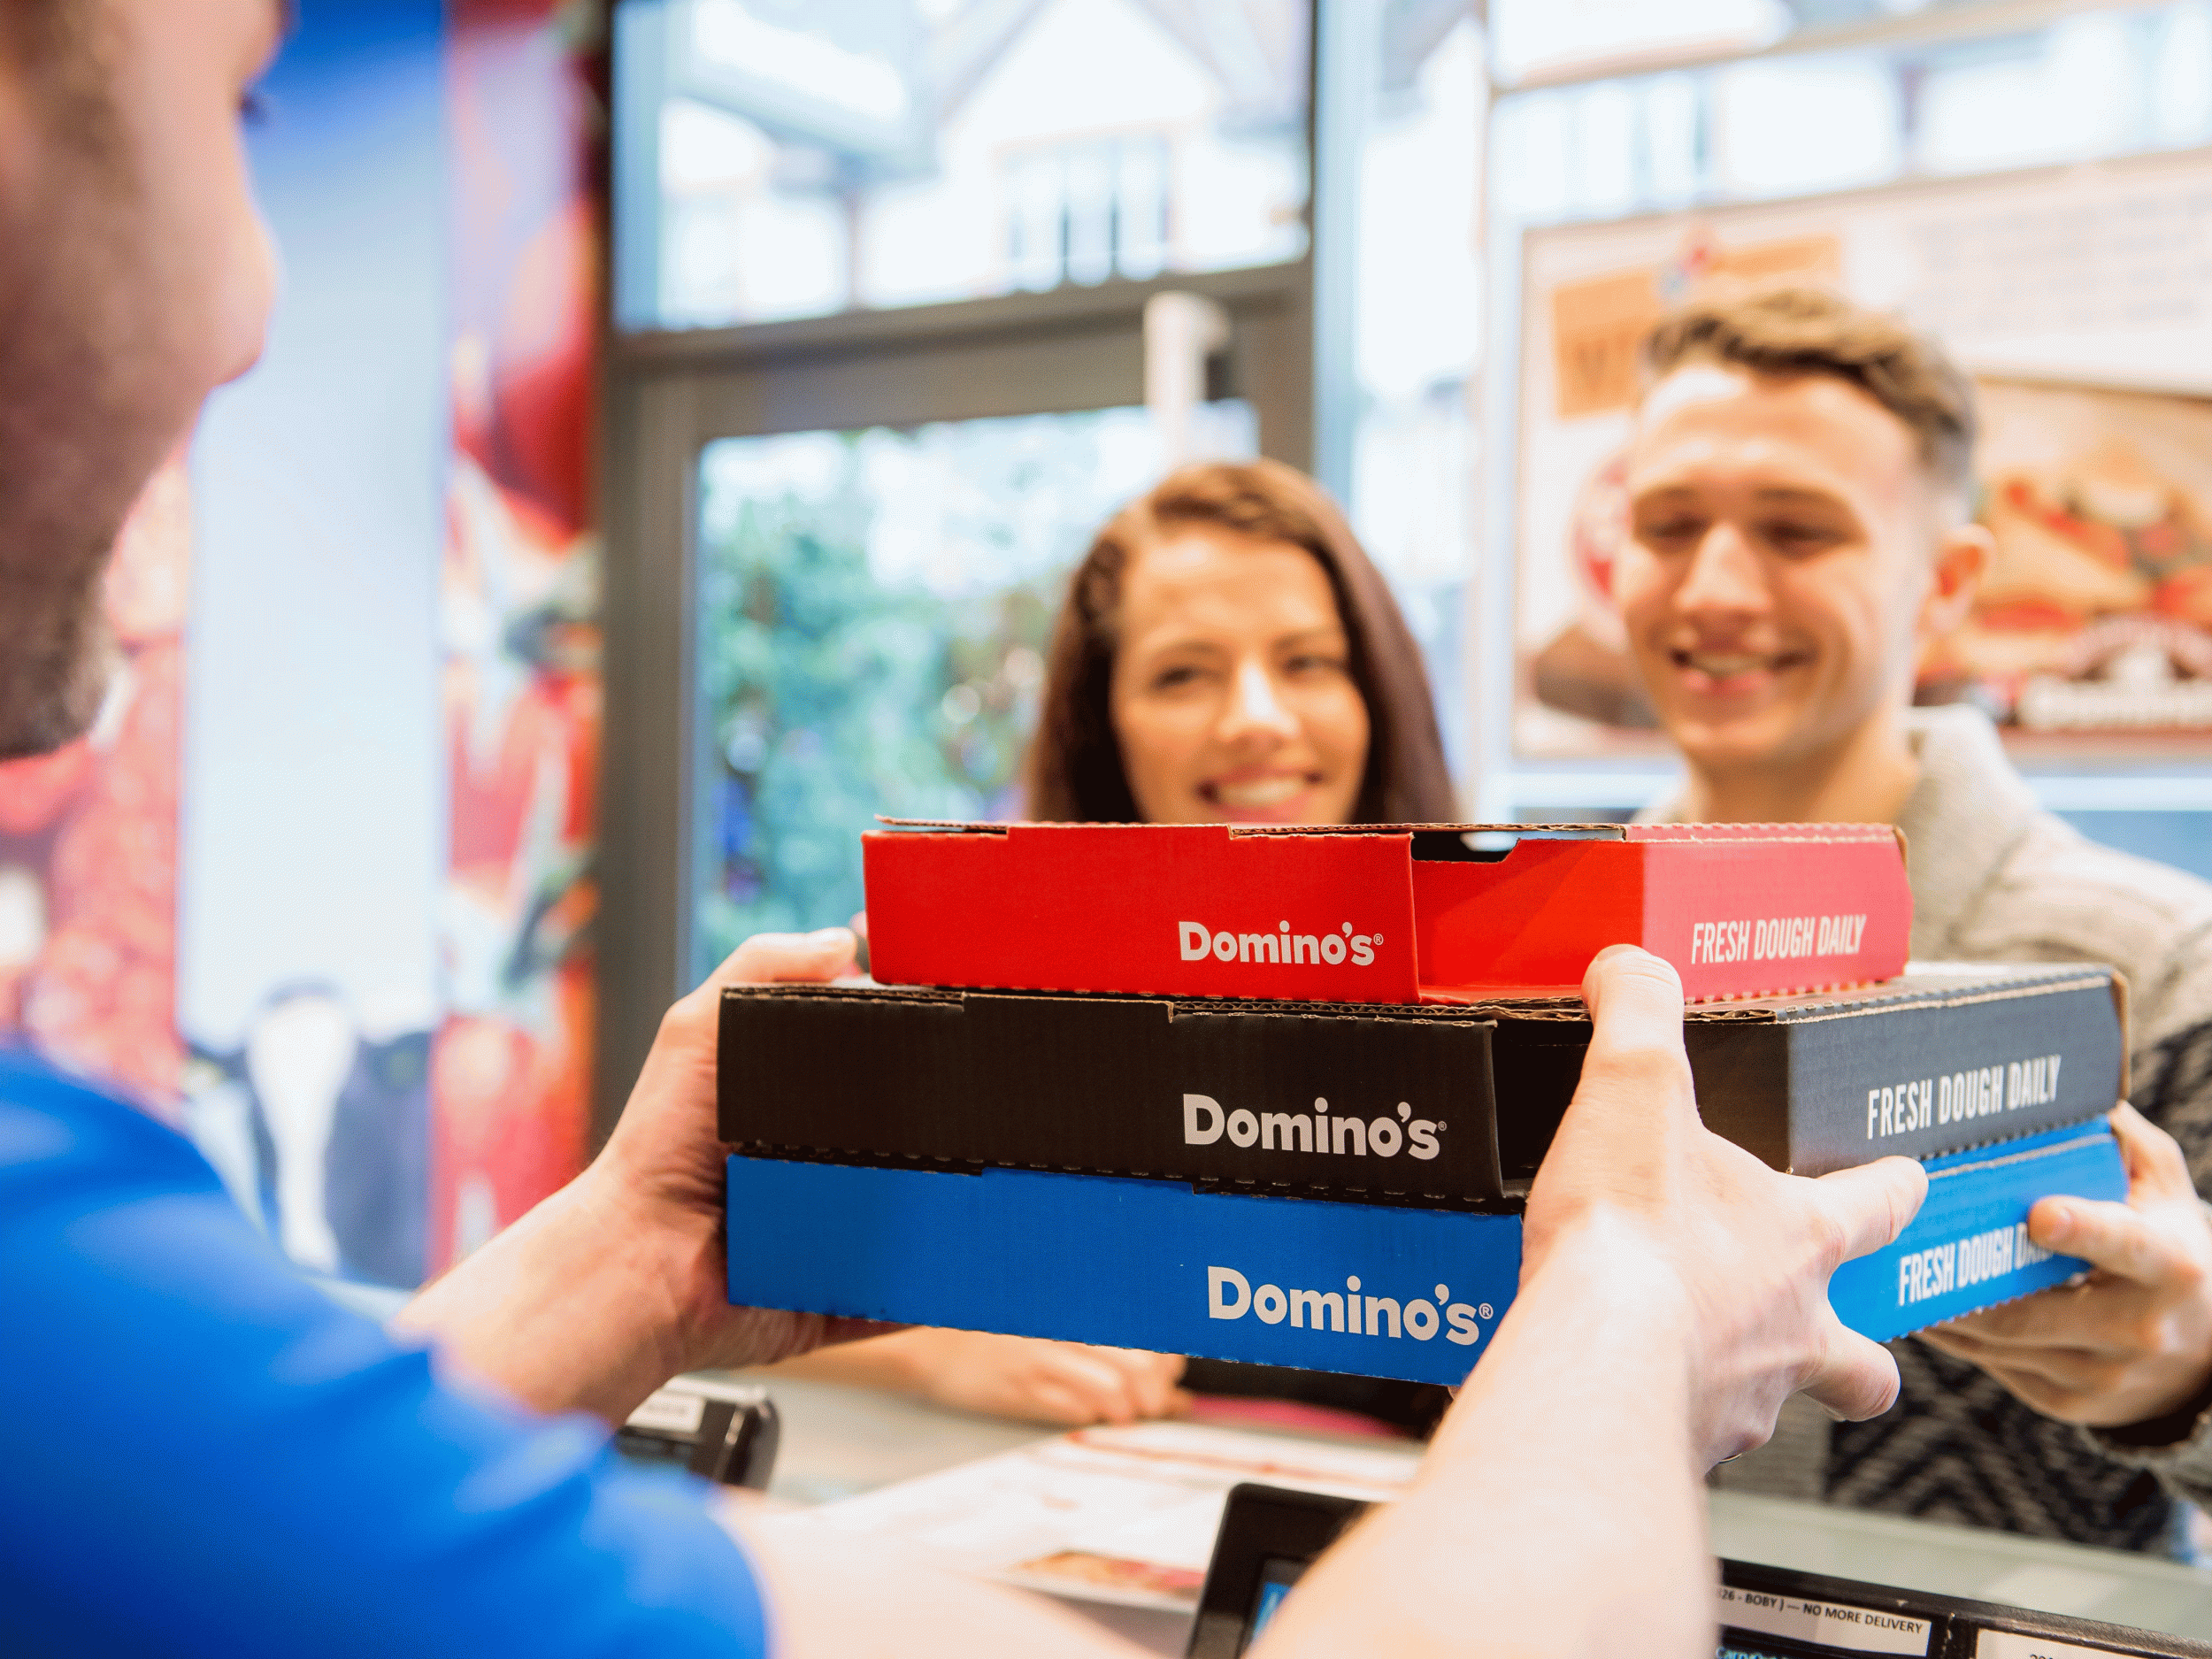 Domino’s said that online sales rose 11.5 per cent for the period and now account for 75 per cent of total sales